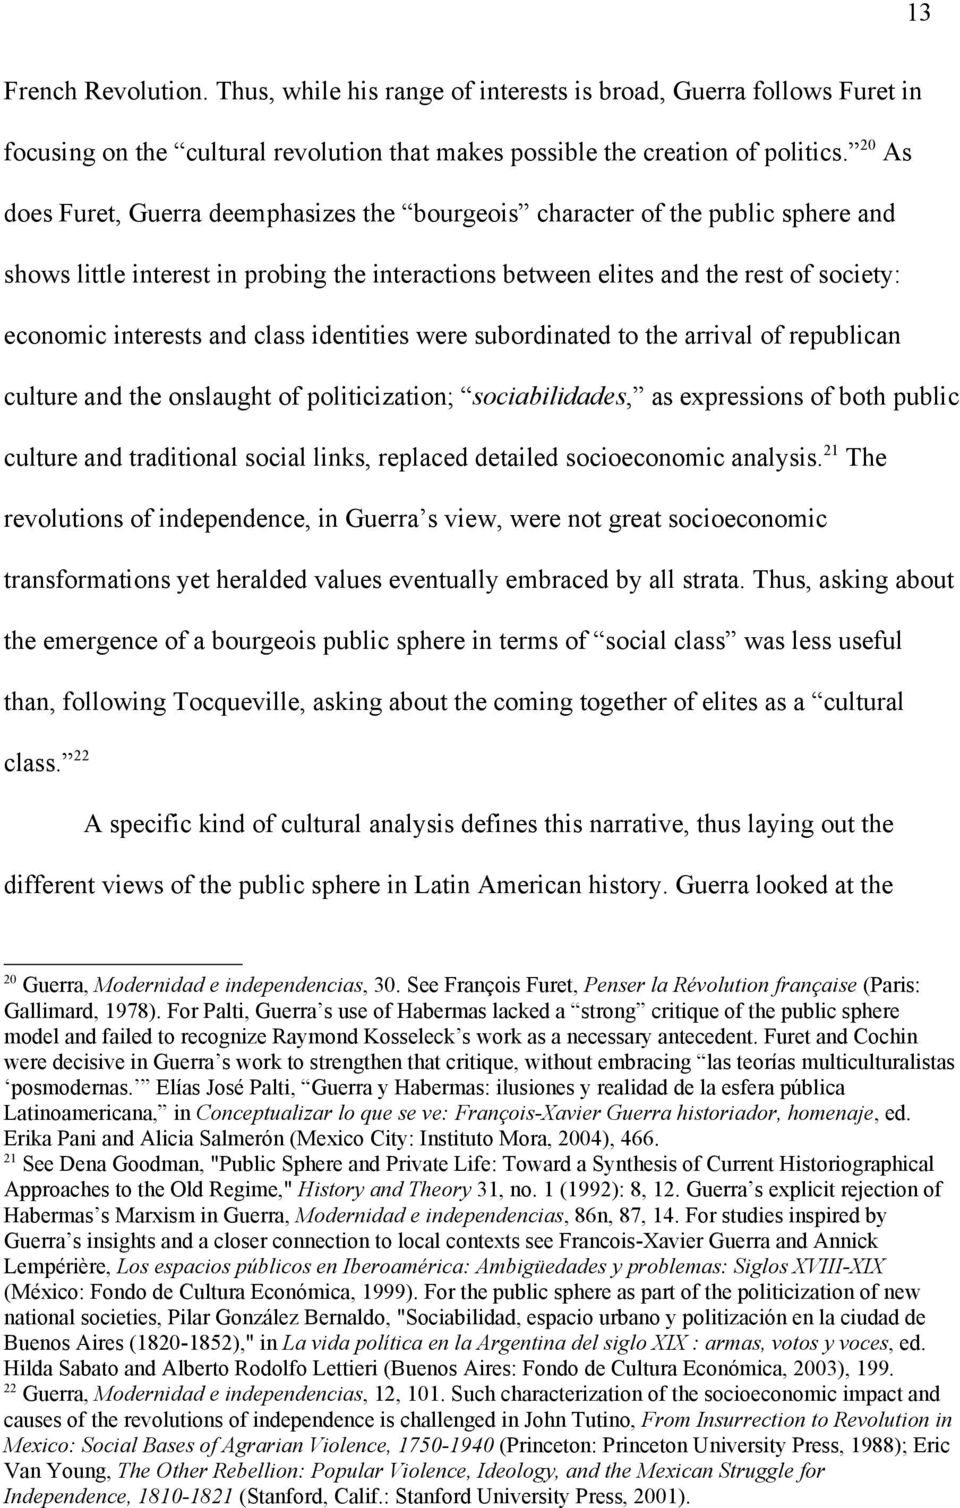 class identities were subordinated to the arrival of republican culture and the onslaught of politicization; sociabilidades, as expressions of both public culture and traditional social links,